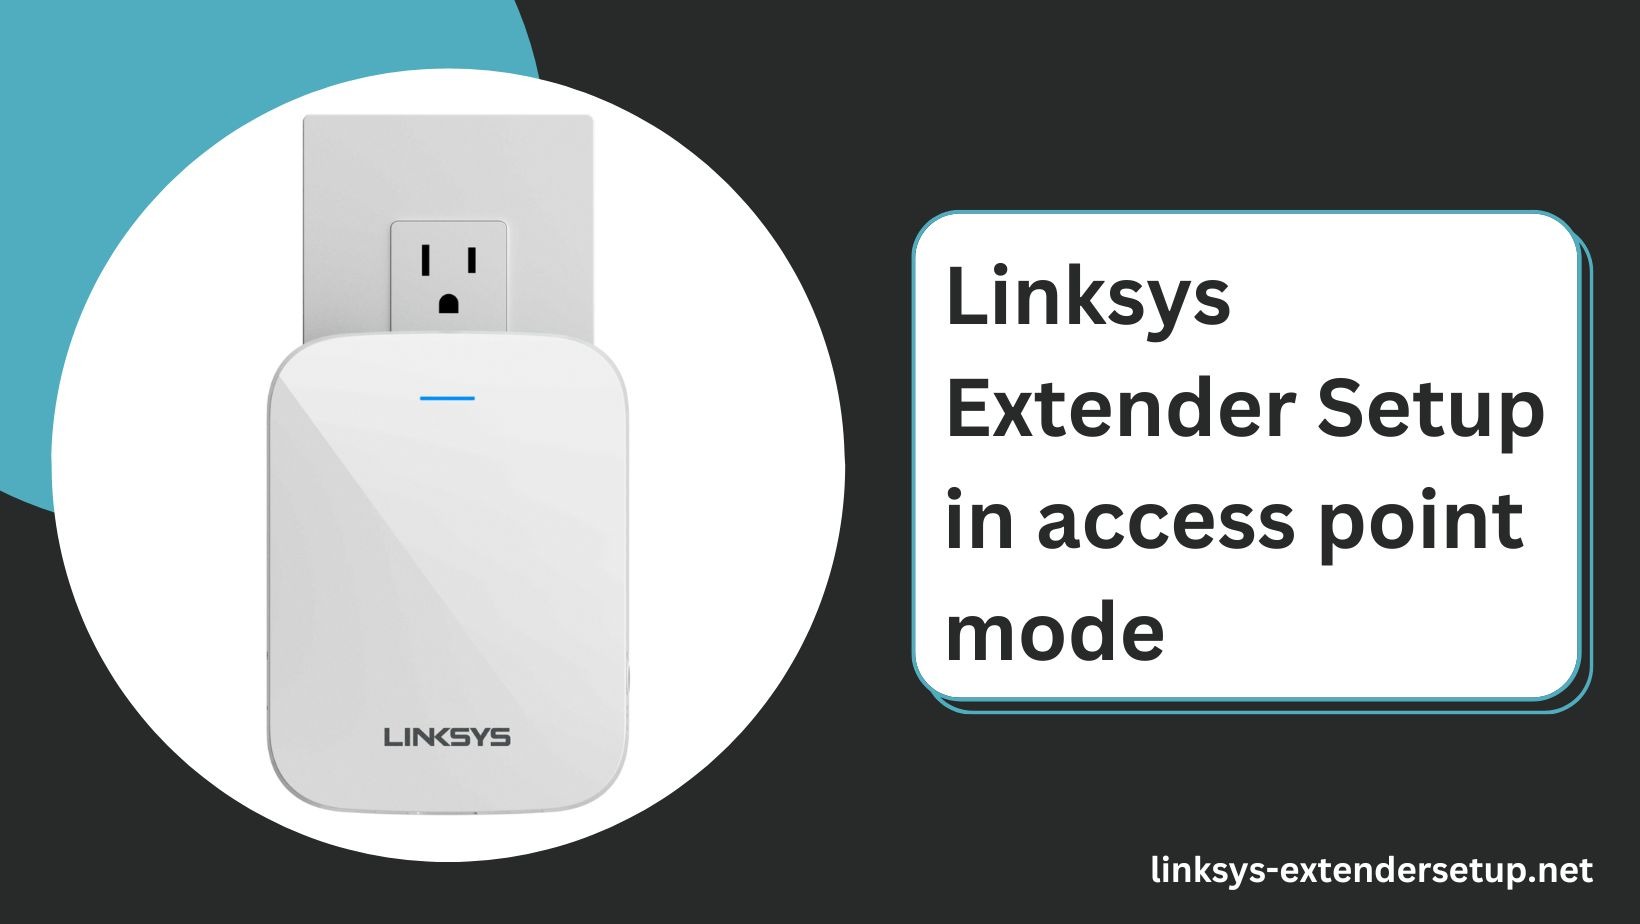 You are currently viewing The ultimate guide for the Linksys extender setup in access point mode